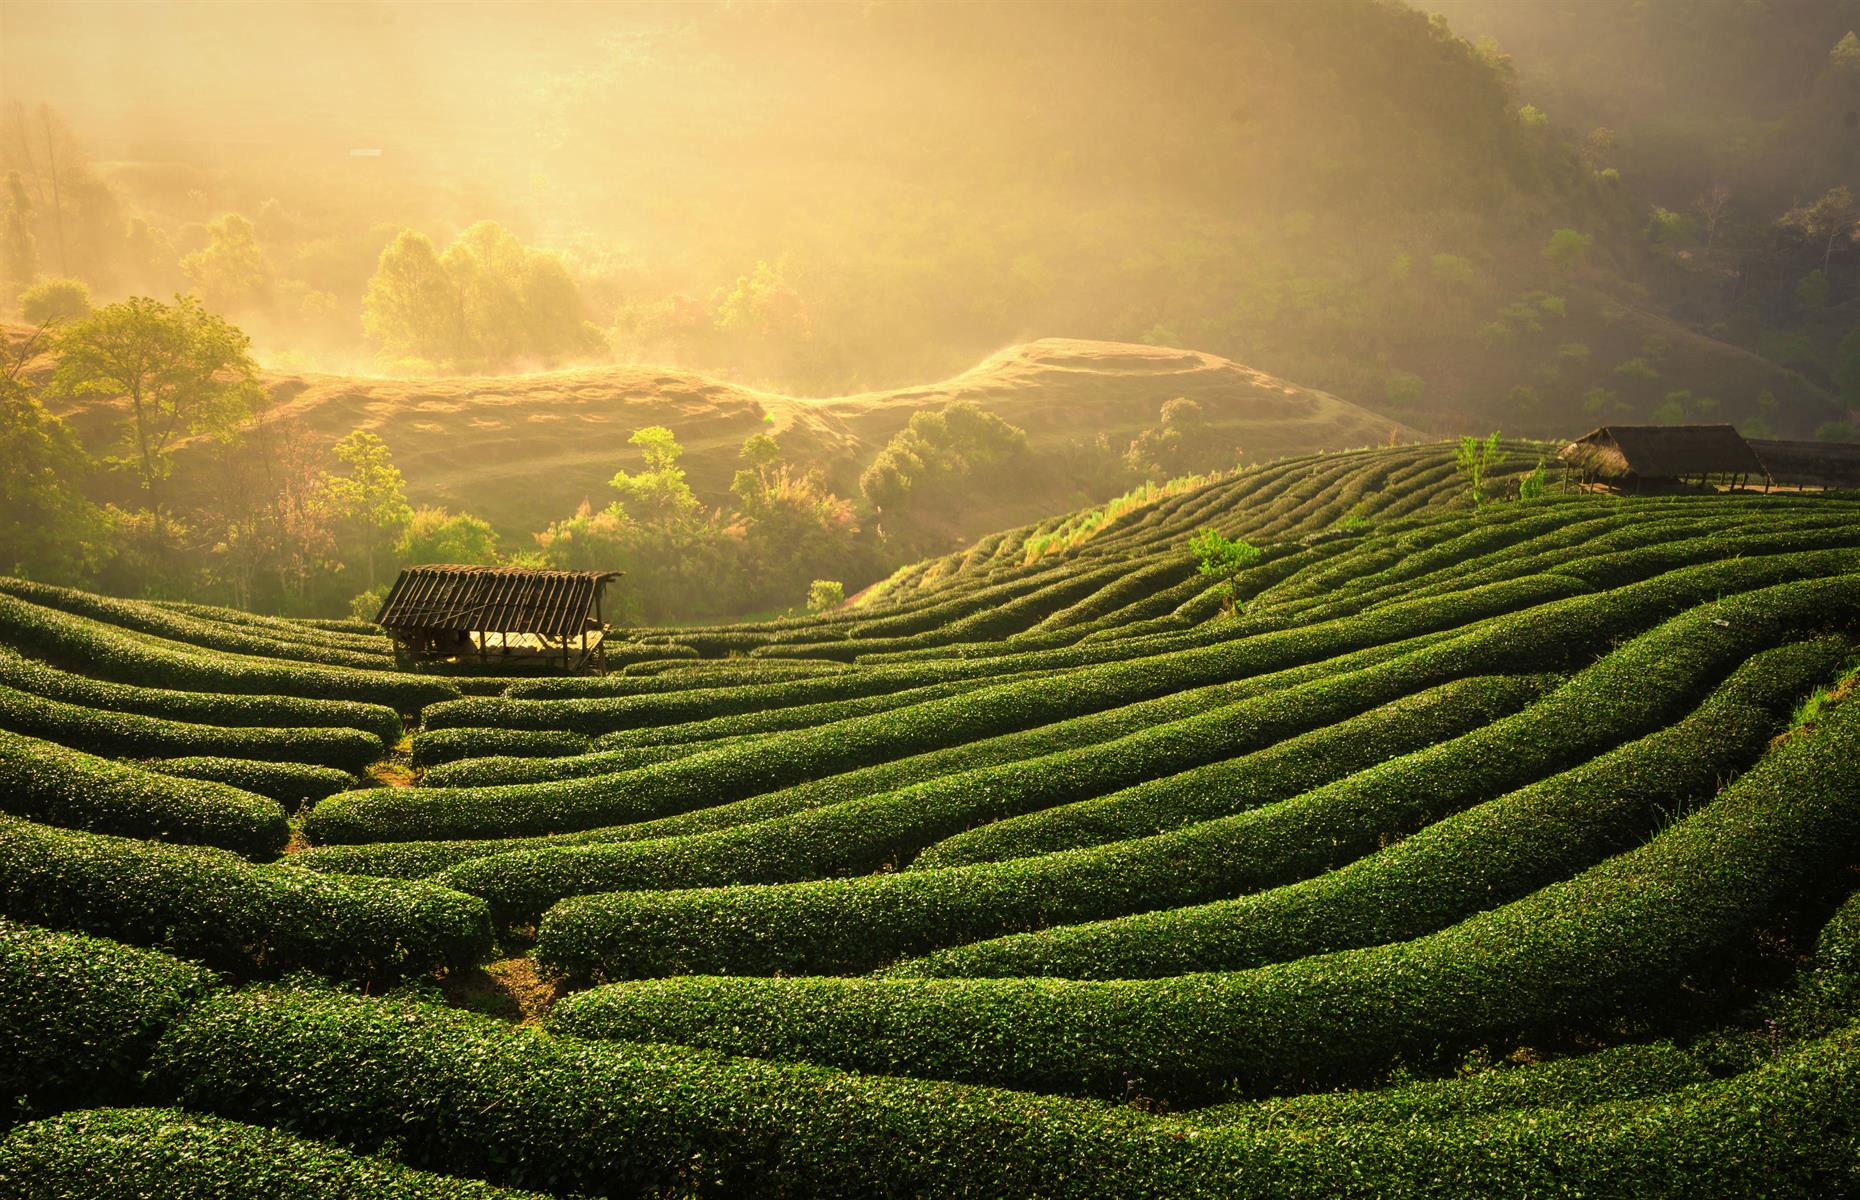 Even the cheapest tea could come from these terraces (image: Shutterstock)